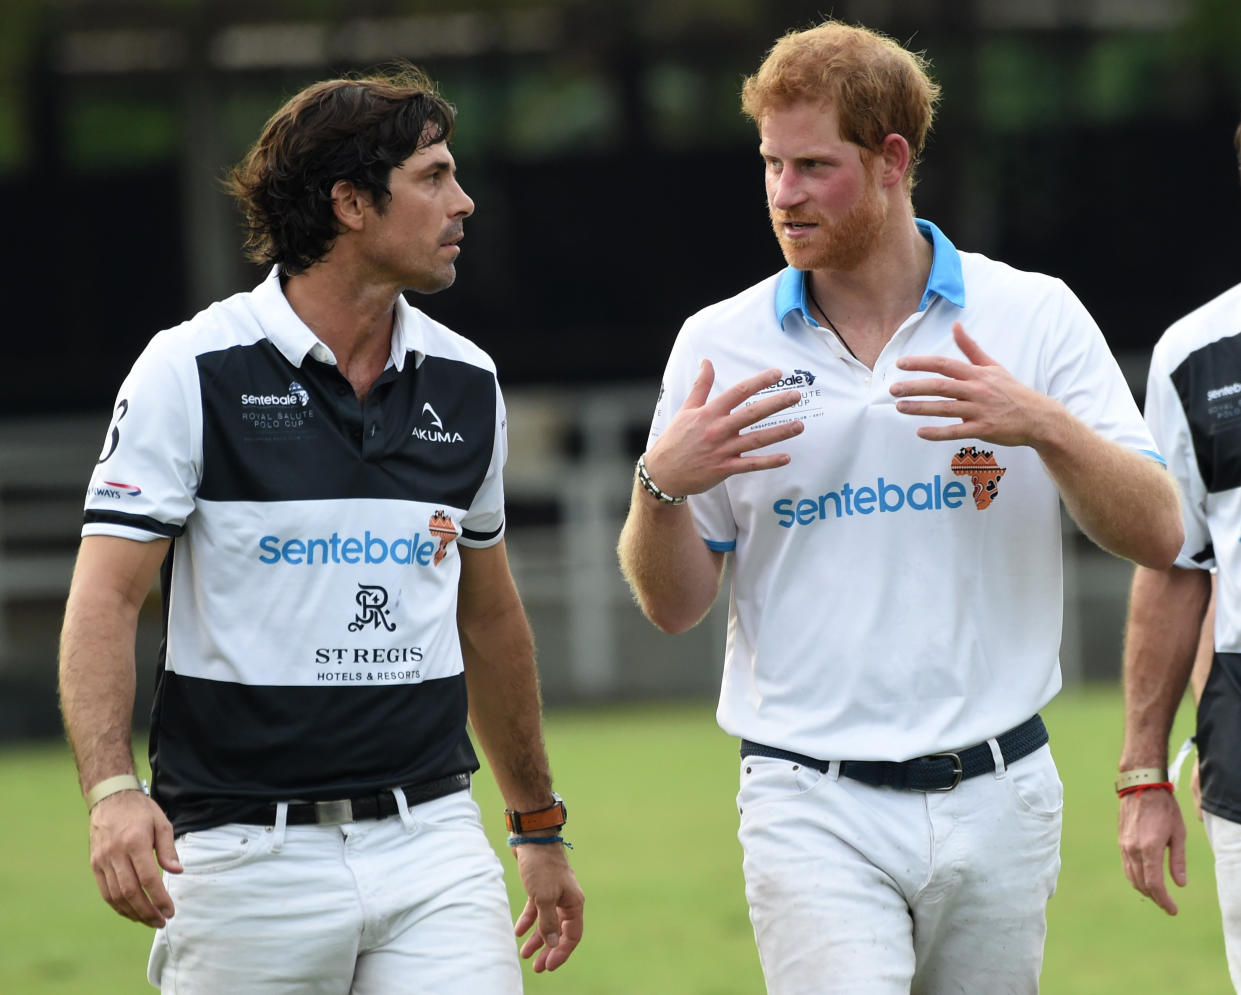 Britain's Prince Harry (R) walks with Argentinian polo player Nacho Figueras (L) after taking part in the Sentebale Royal Salute Polo Cup in Singapore on June 5, 2017.
Prince Harry is on a two-day visit to Singapore to take part in charity events. / AFP PHOTO / ROSLAN RAHMAN        (Photo credit should read ROSLAN RAHMAN/AFP via Getty Images)